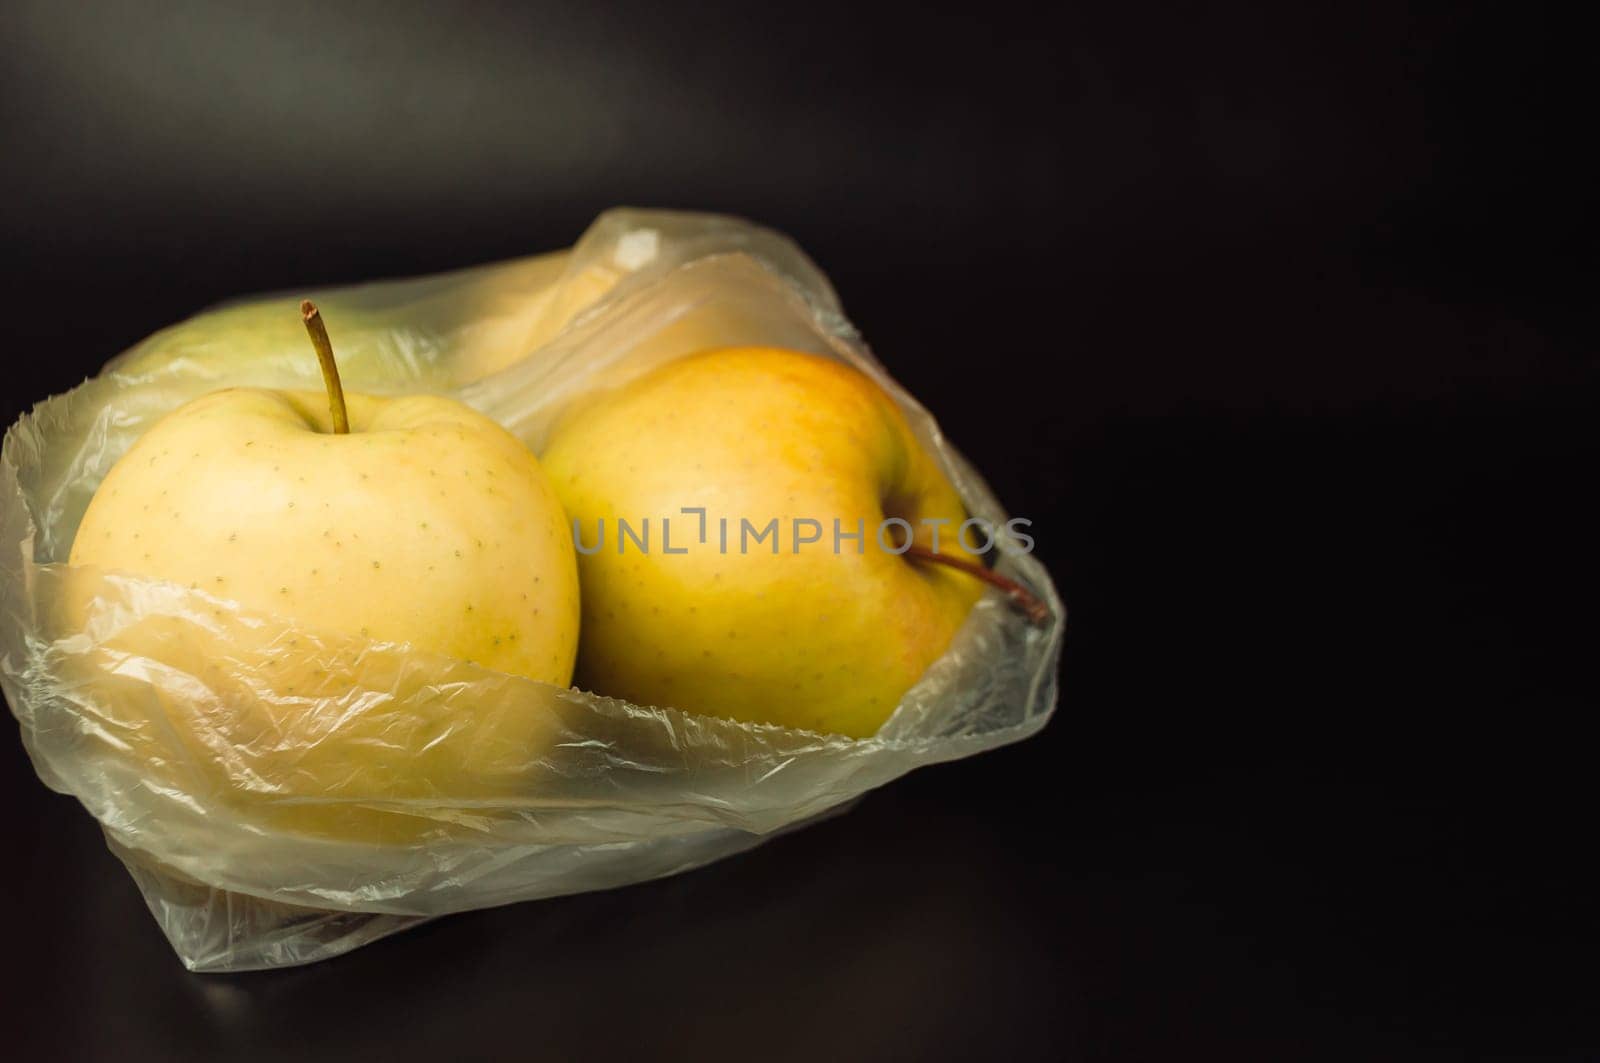 A plastic bag with two apples in it. Fresh apples, encased in non-recyclable plastic